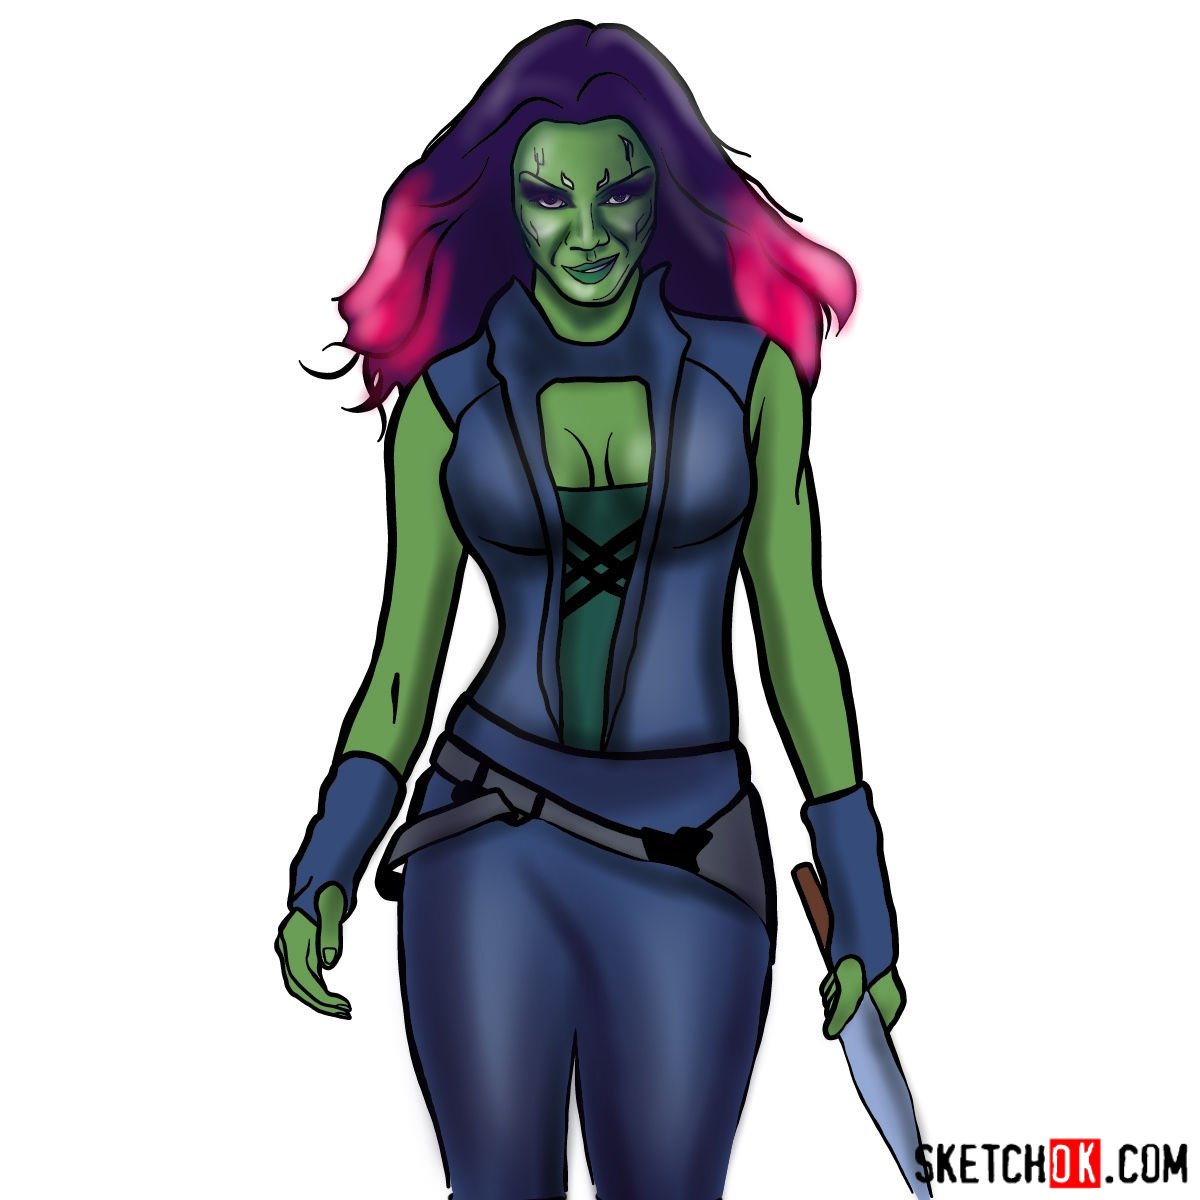 How to draw Gamora from Guardians of the Galaxy